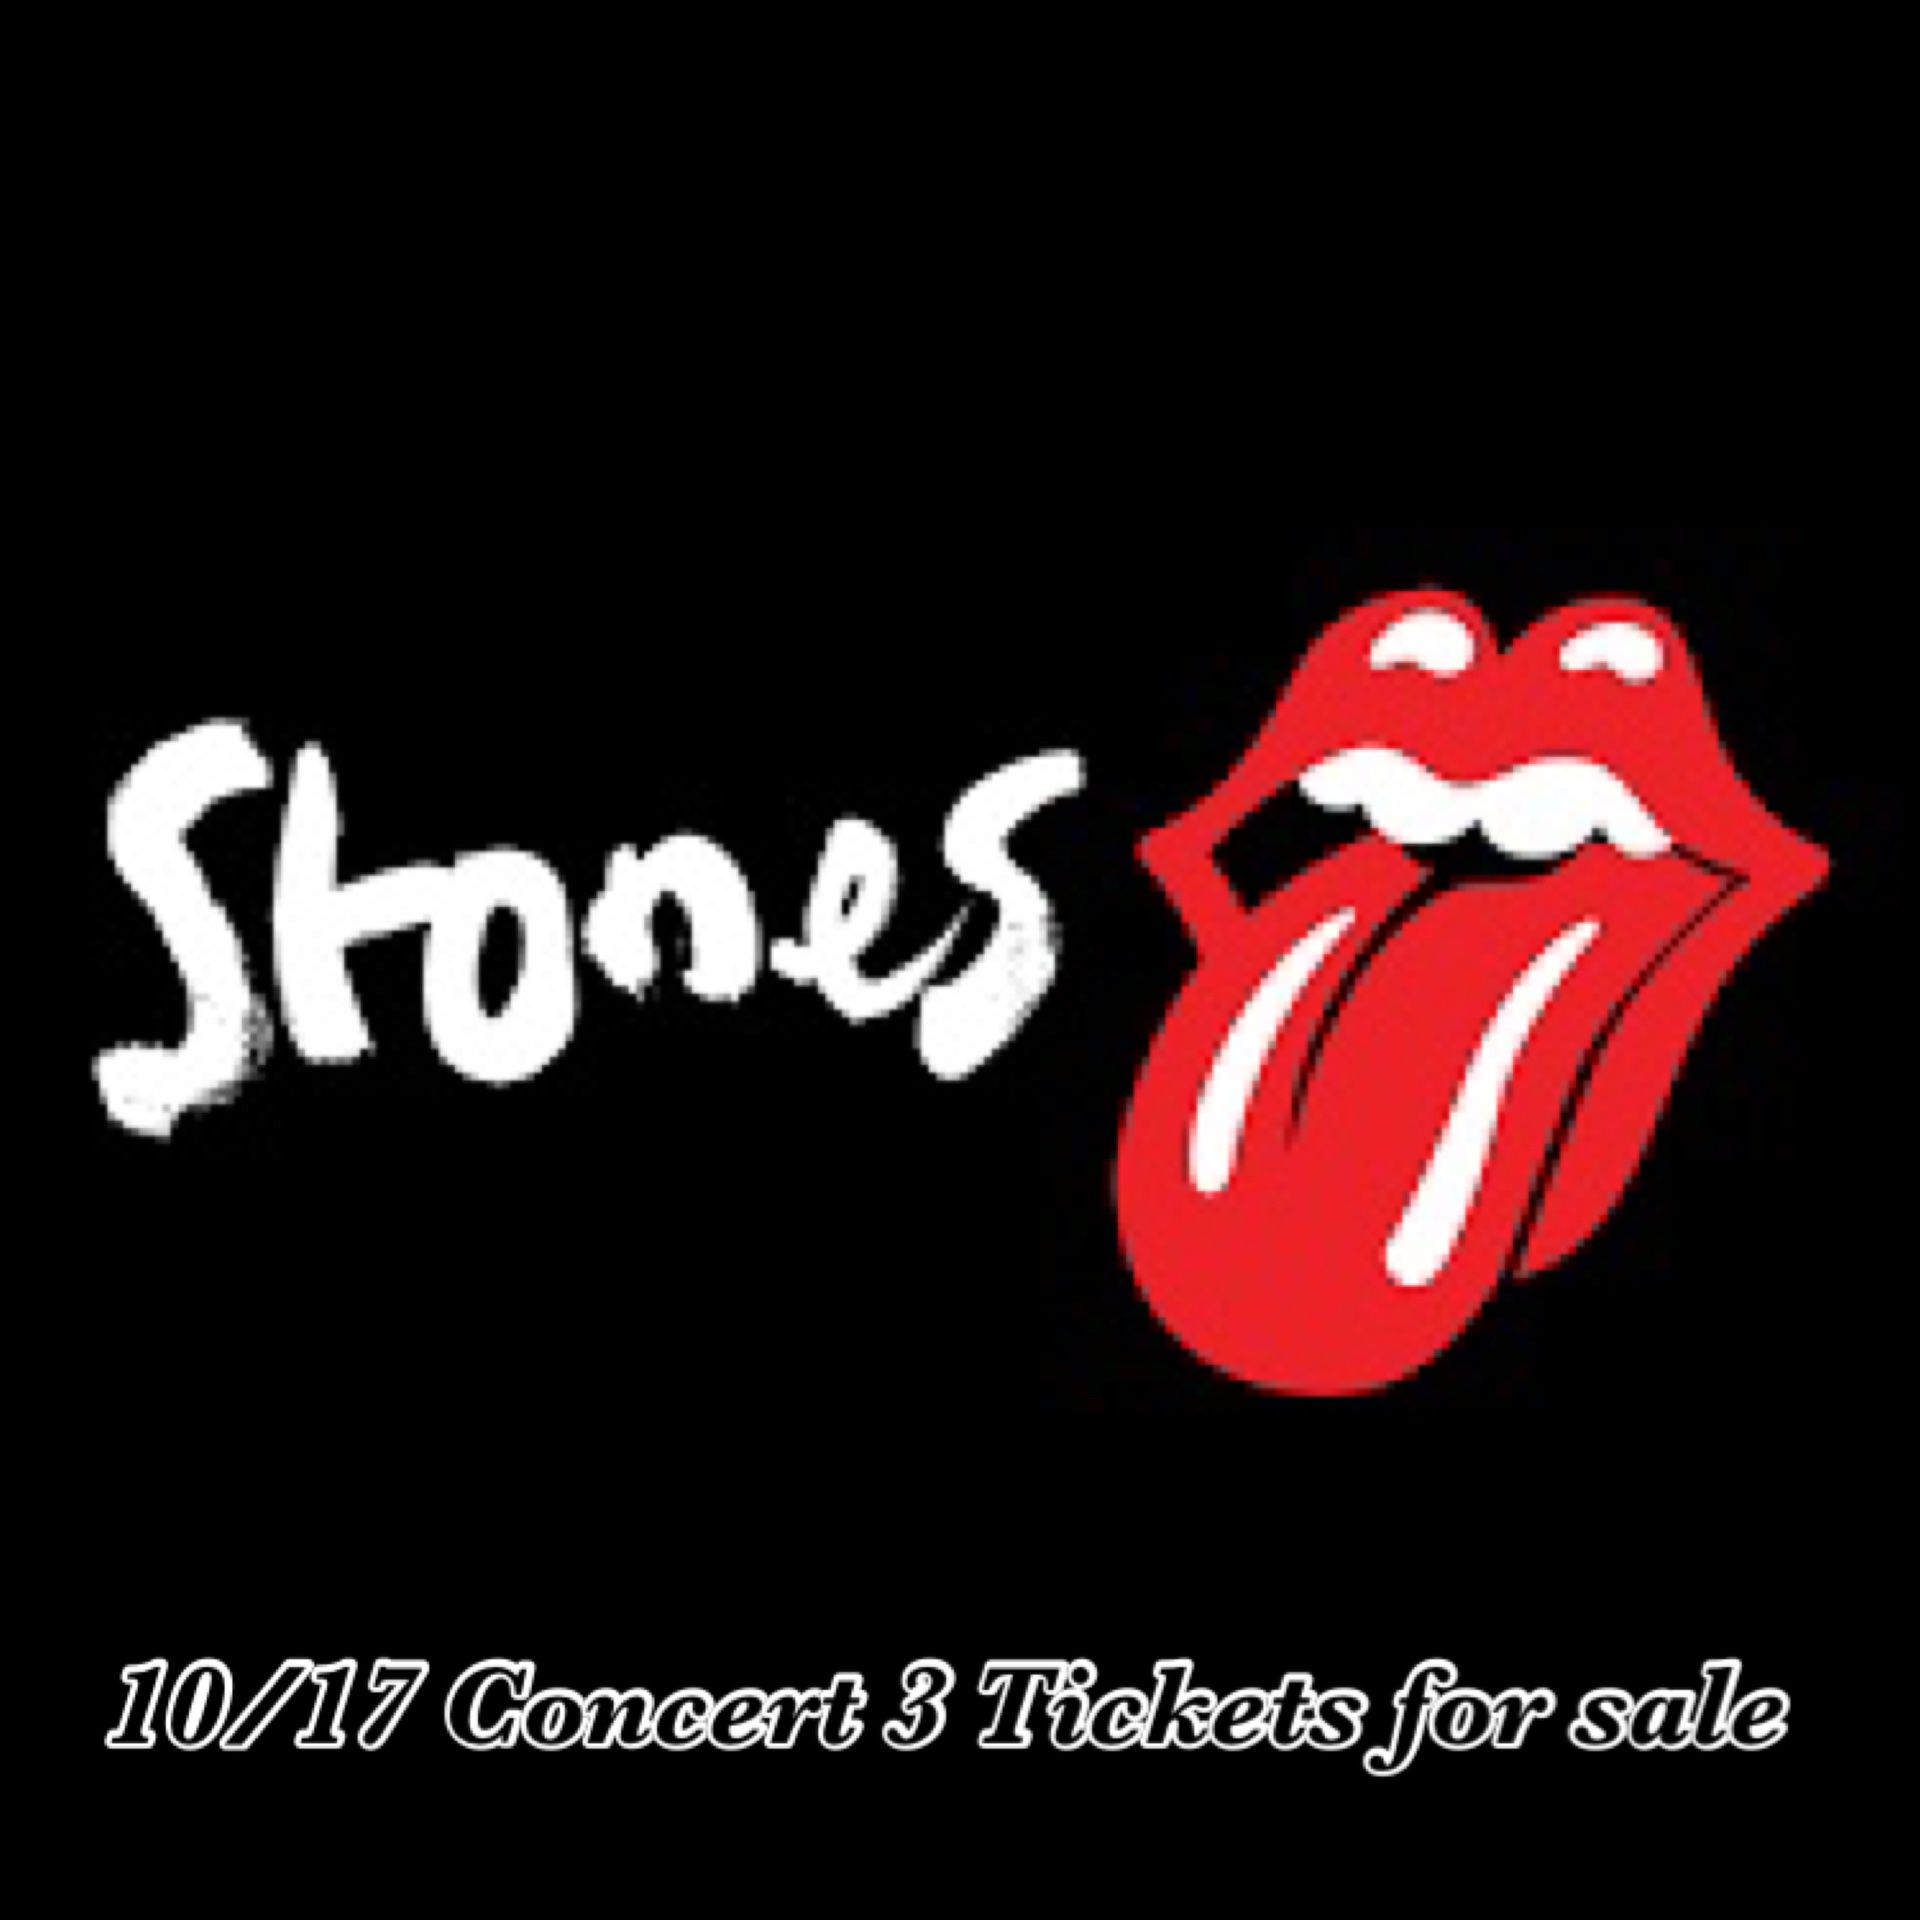 3 Rolling Stones tickets Section 347 for Sunday 10/17